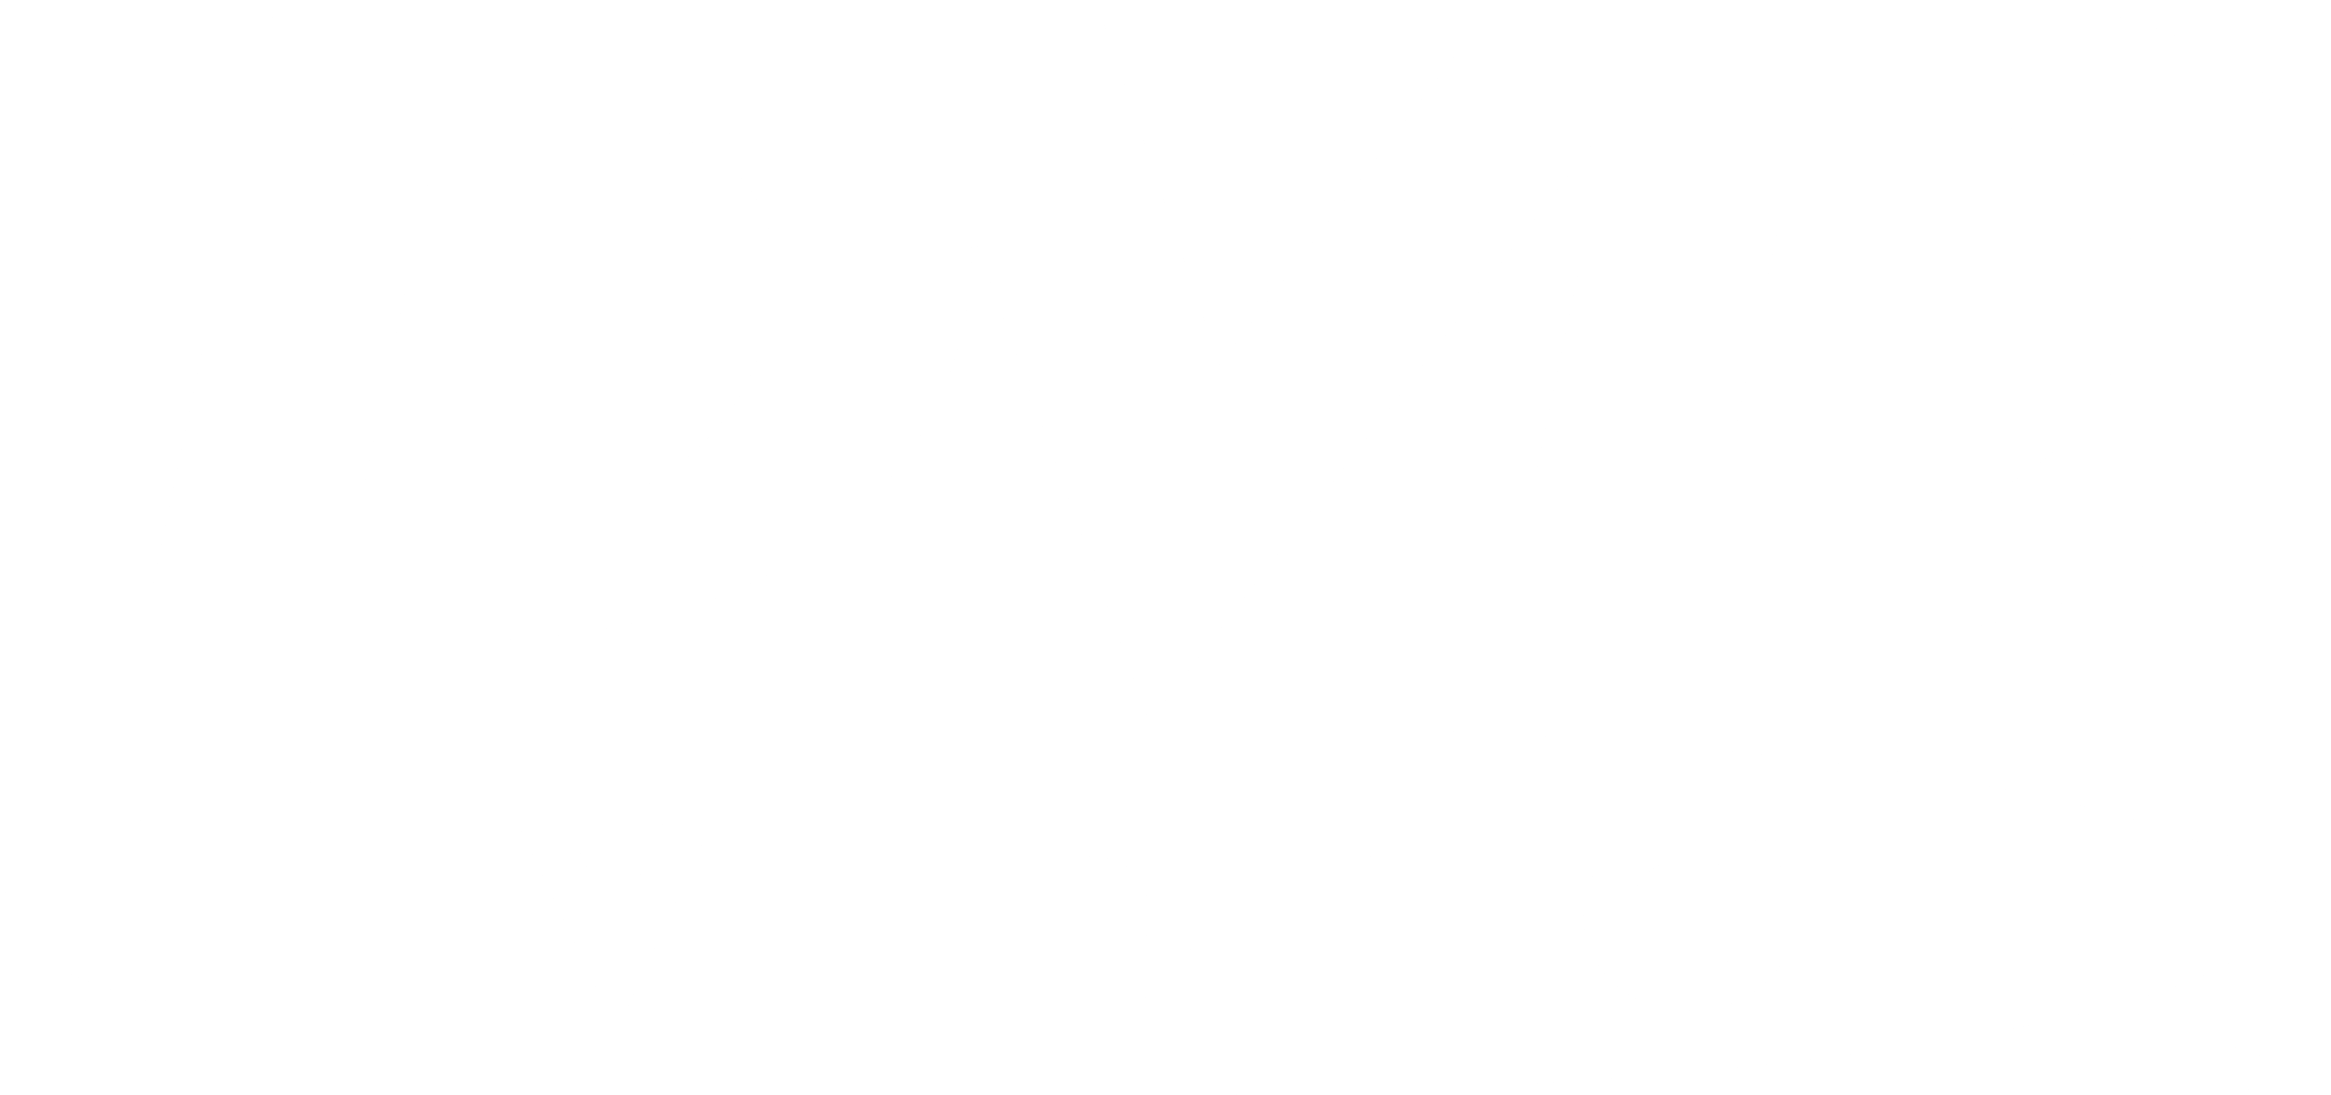 Download Dvd Video Logo Black And White Samsung Logo White Png Png Image With No Background Pngkey Com